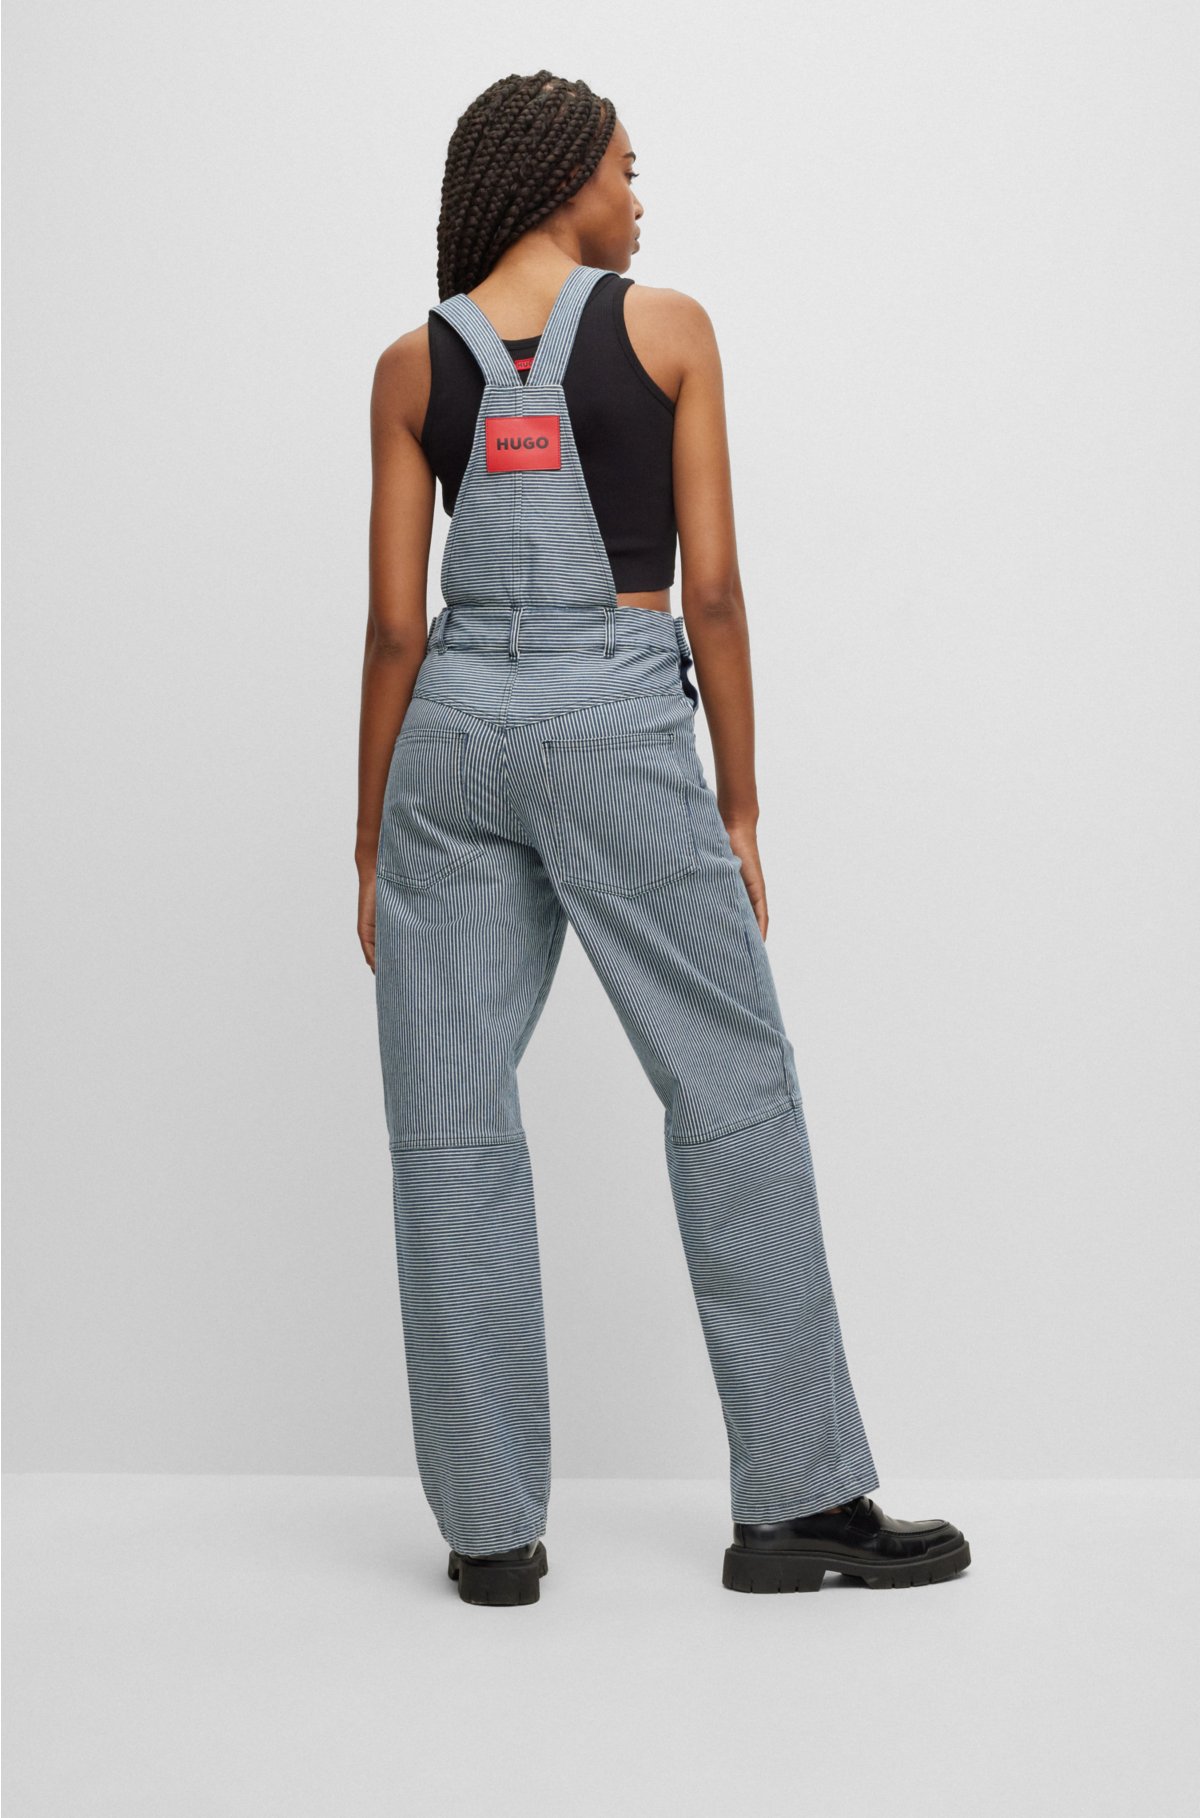 HUGO - Relaxed-fit dungarees in striped stretch